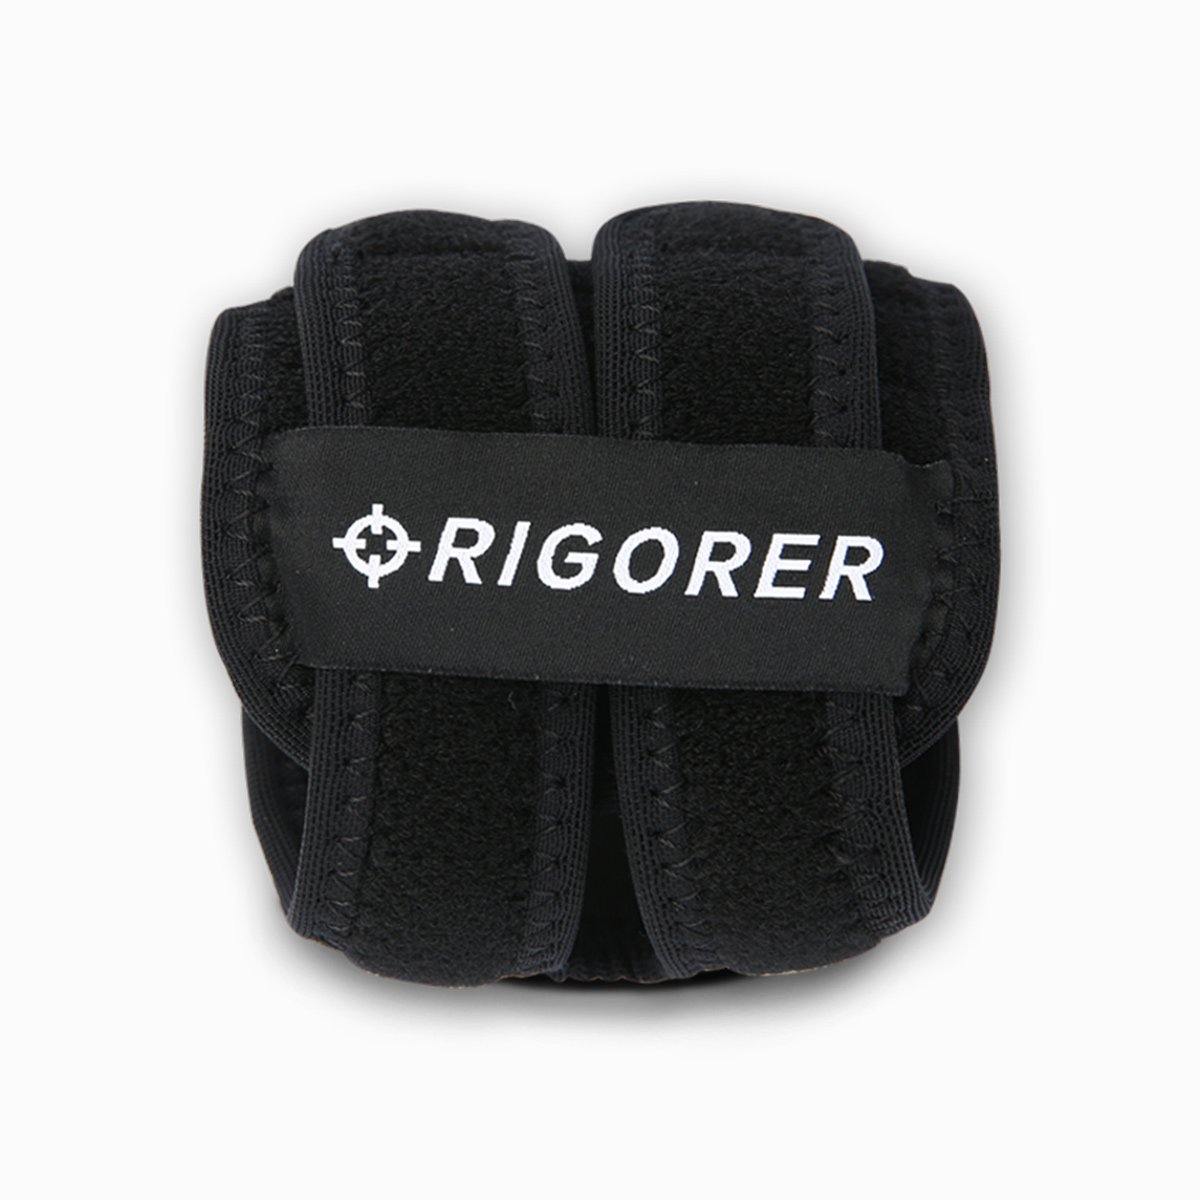 1 Pair Wristband Elastic Wrist Wraps Bandages Lifting Breathable Support Straps Hand Protector Sports Safety - Rigorer Official Flagship Store